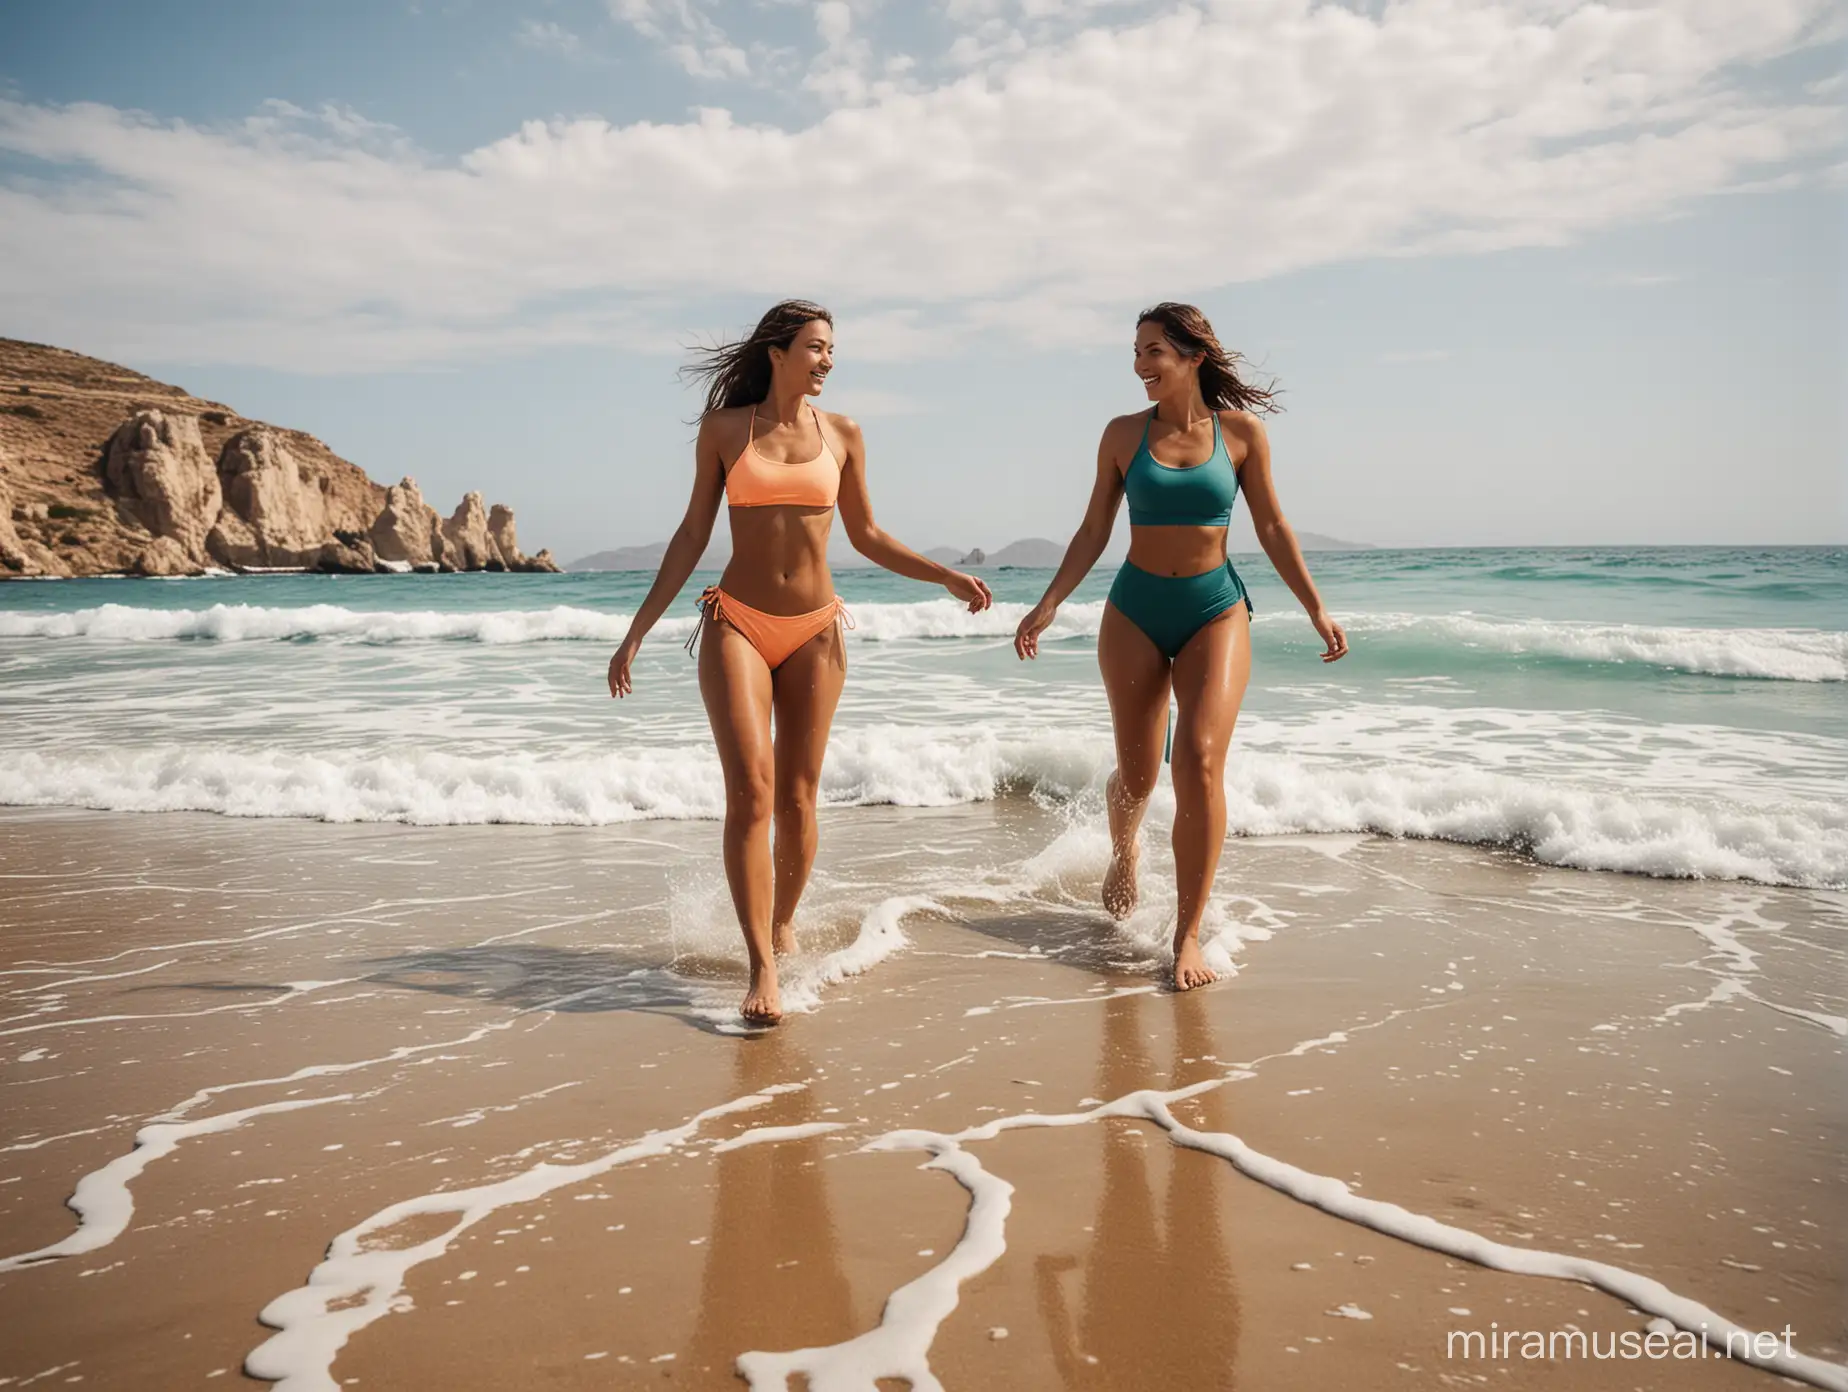 Hyperrealisc foto. A 25-year-old women, a tanned complexion, wearing a matching fitness outfit runs with her feet in the waves on a deserted greek beach accompanied by here boyfriend. Colourful splashes. Wide angle fotographie